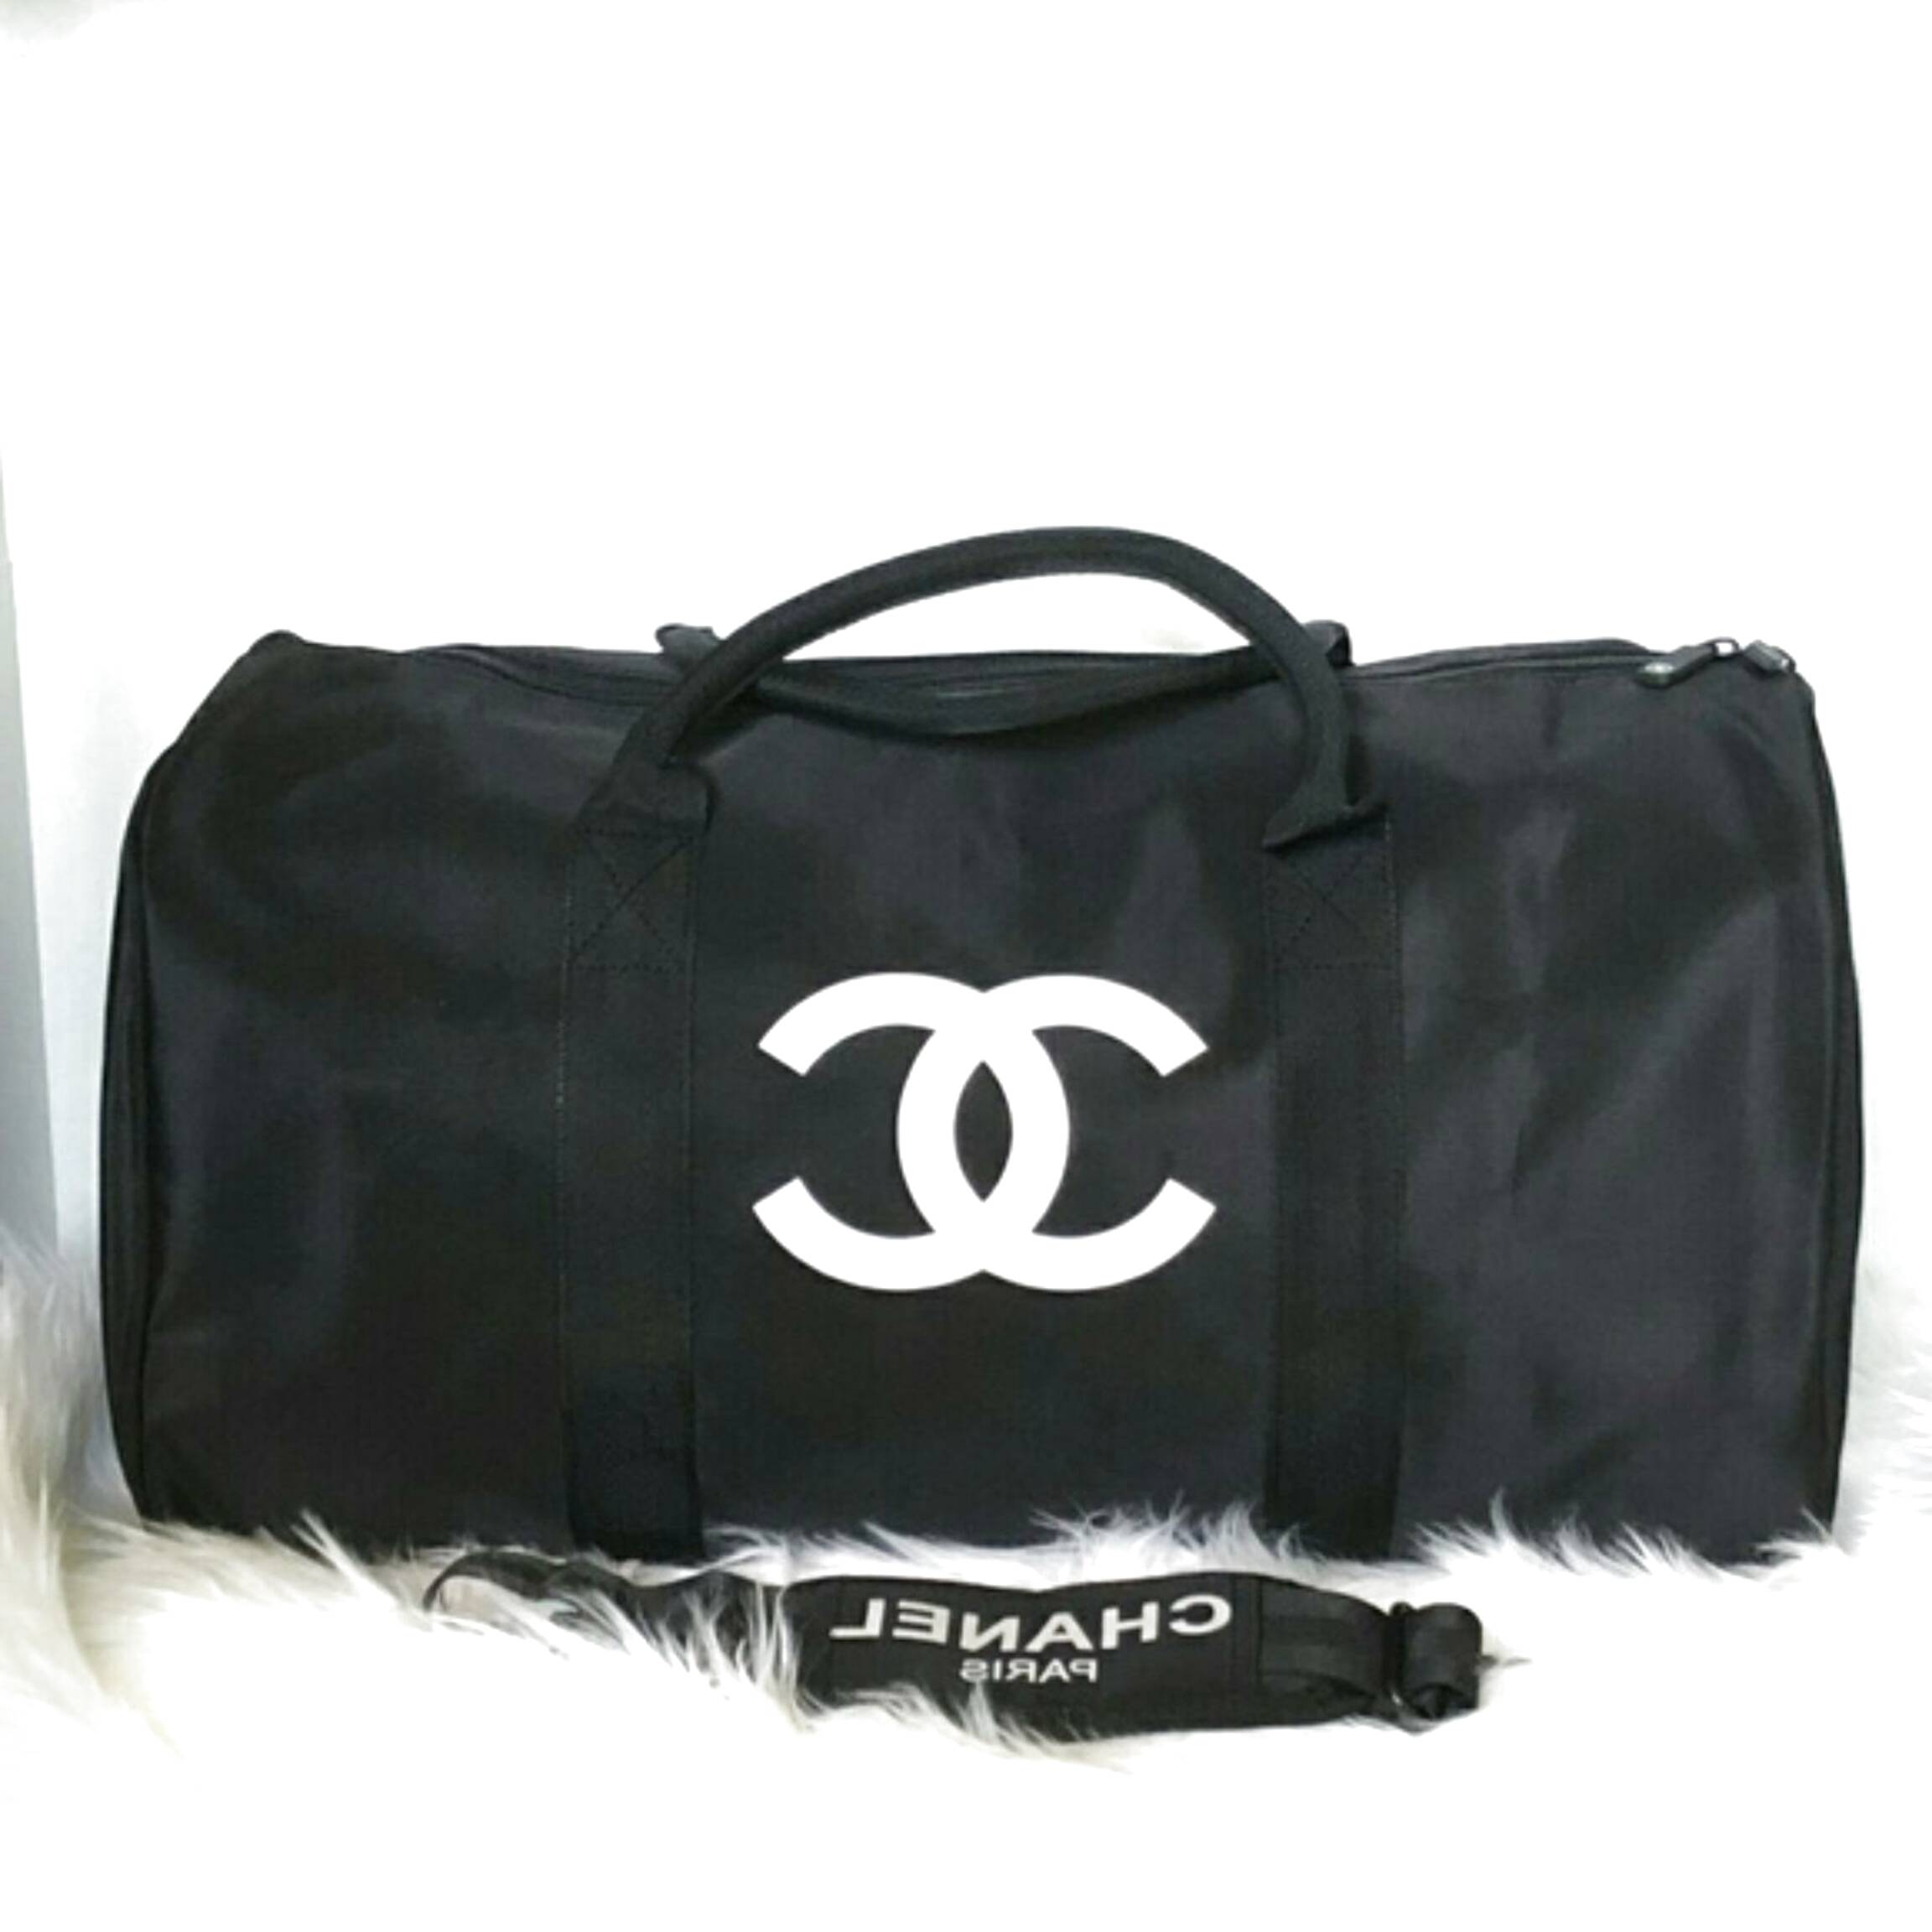 Chanel Gift Bag for sale in UK | 68 used Chanel Gift Bags